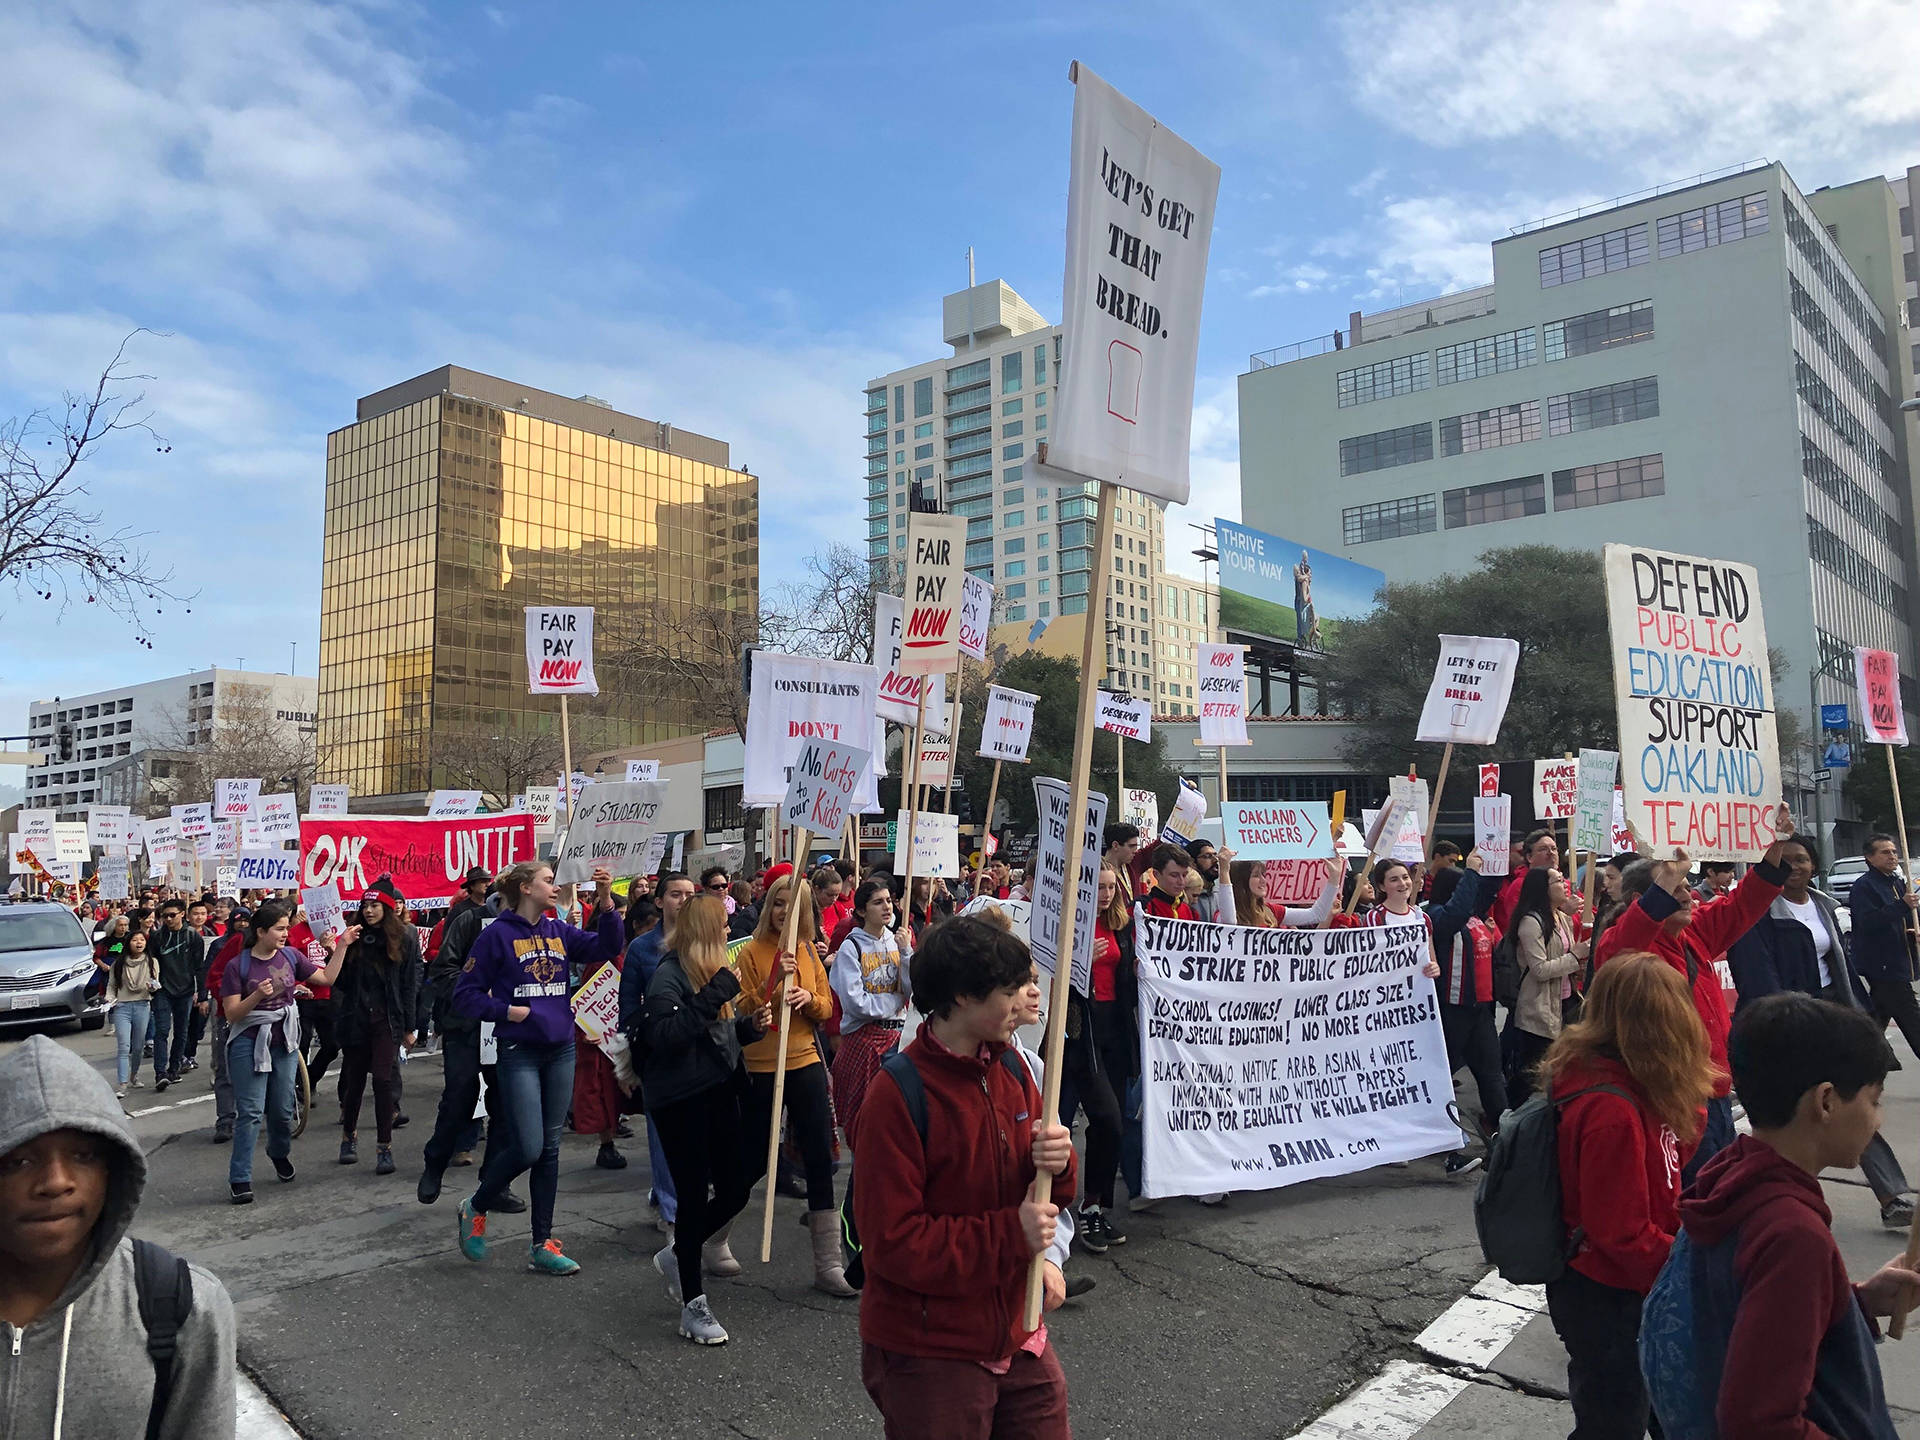 Hundreds of Oakland teachers, students and supporters, frustrated over an impasse in contract negotiations with the school district, gathered outside Oakland Technical High School and then marched in a walkout on Jan. 18, 2019. Ryan Levi/KQED